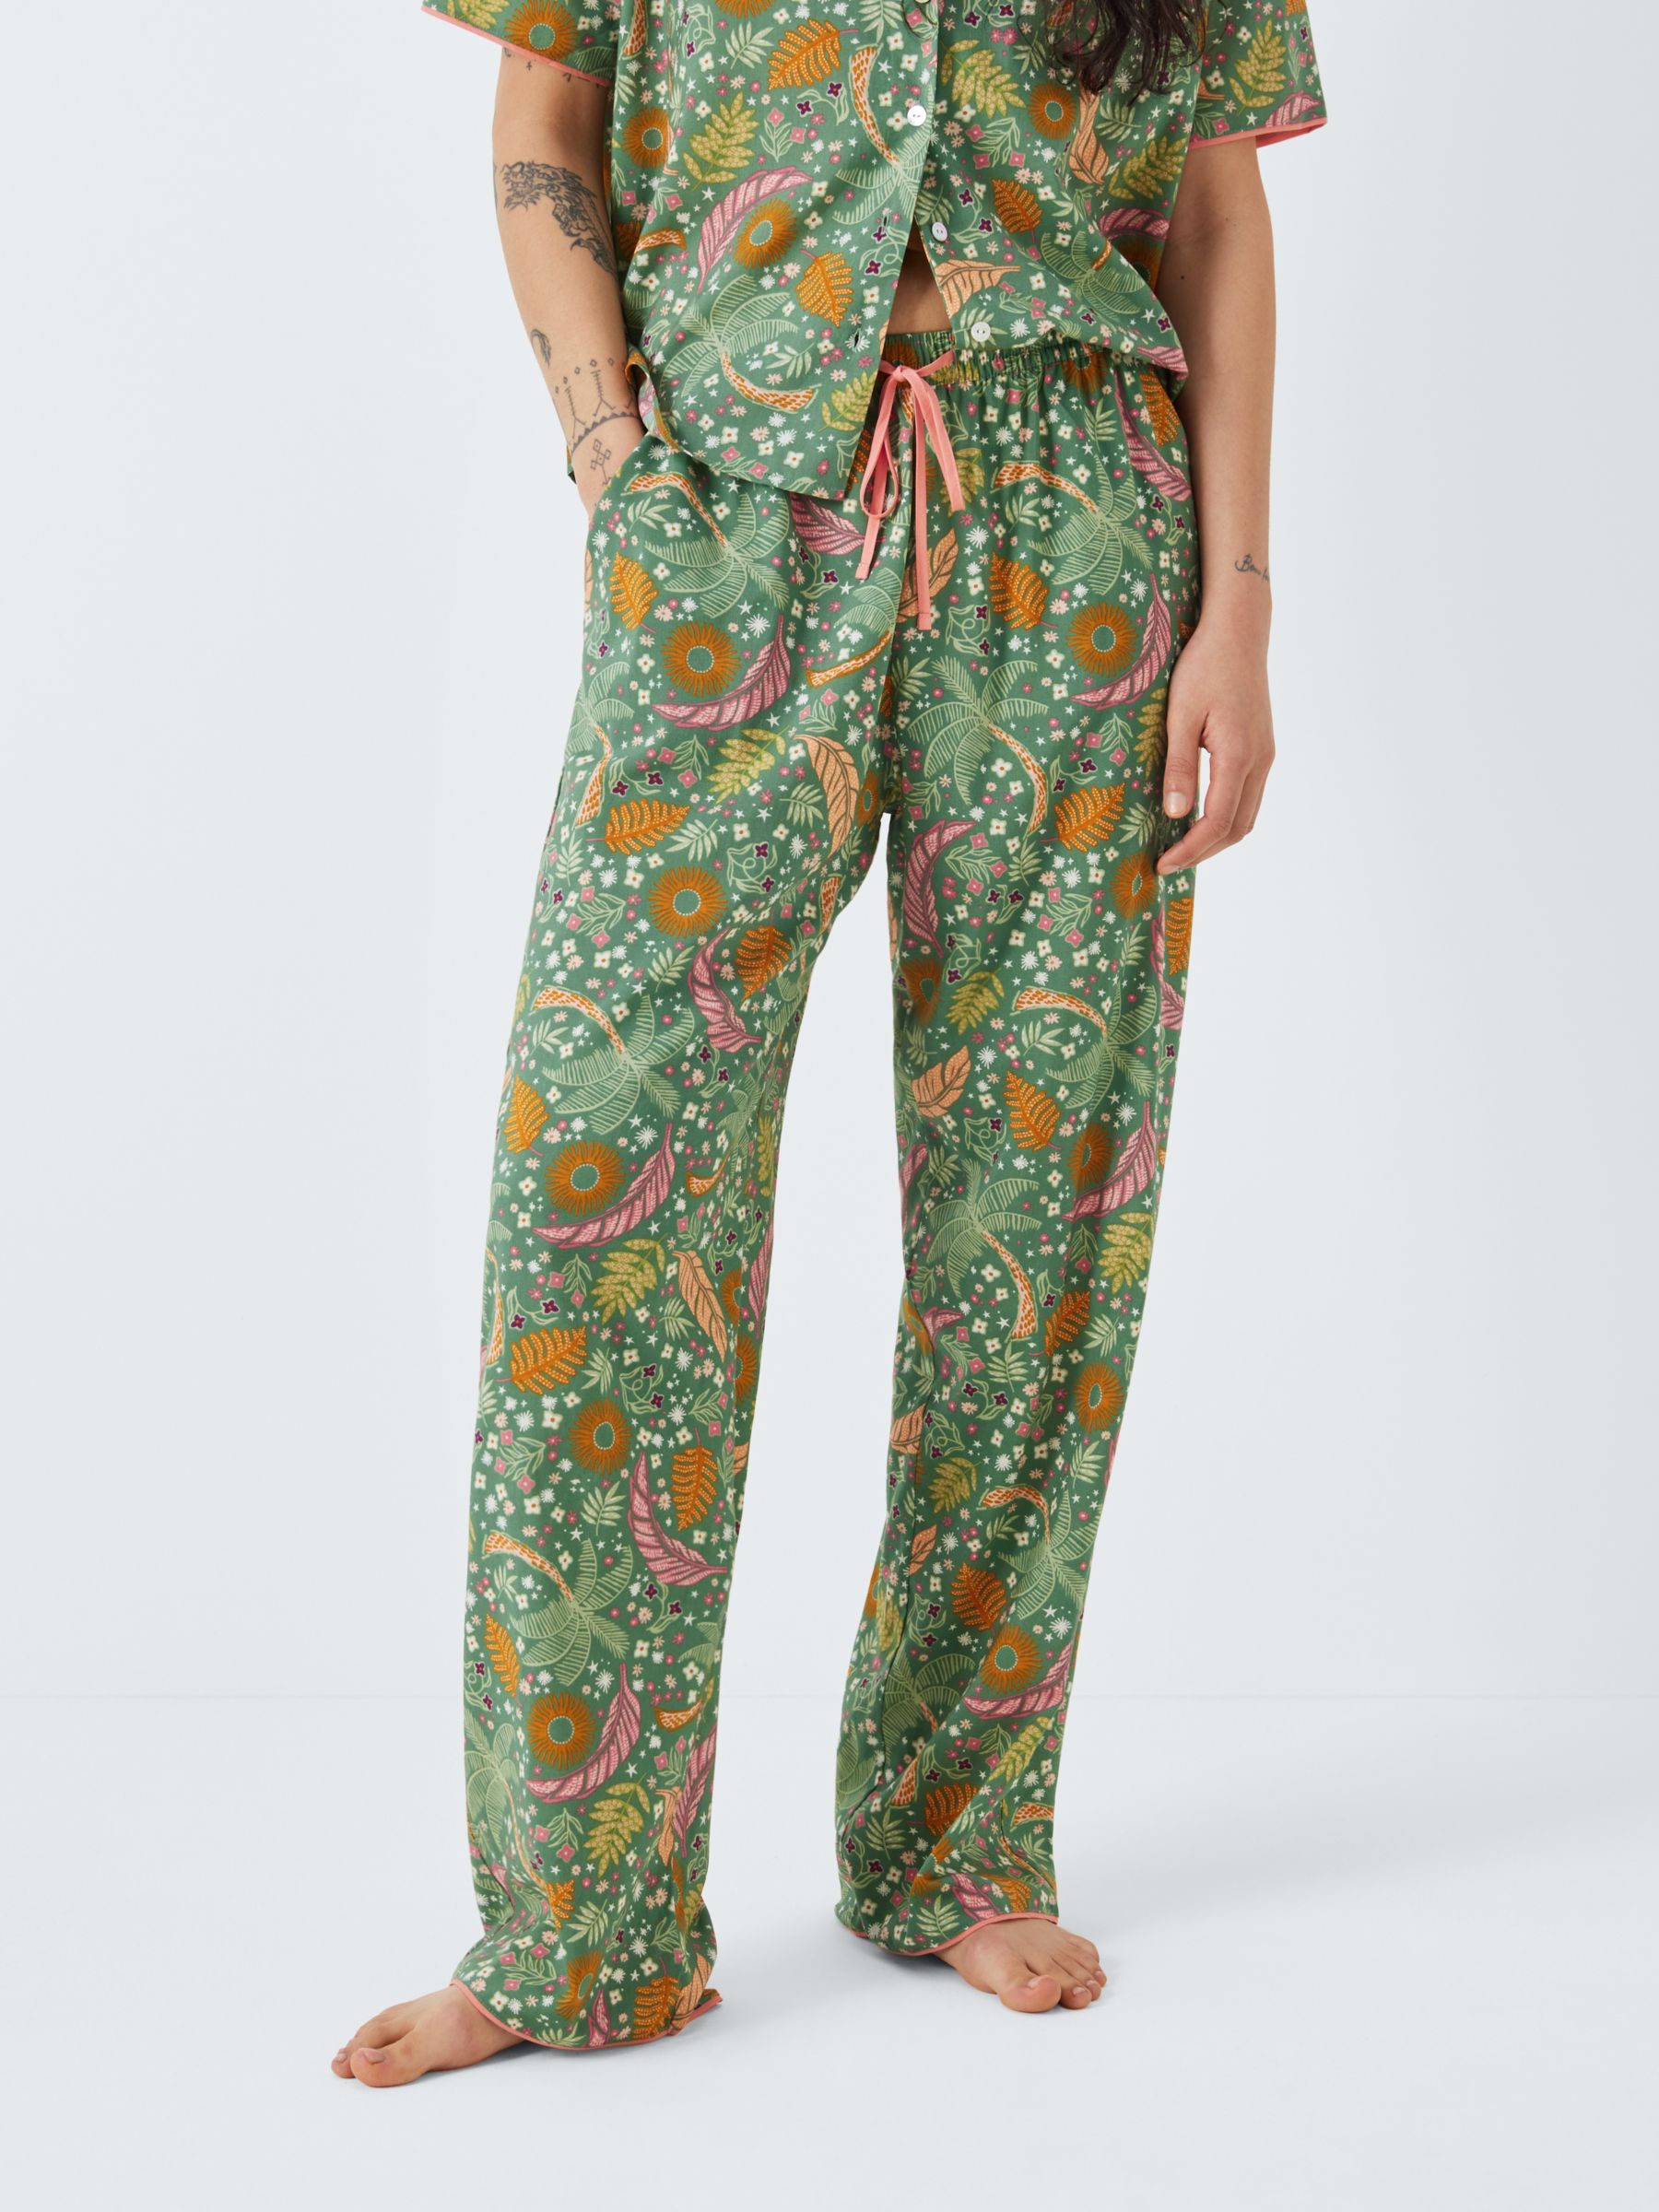 Buy AND/OR Summers Dream Pyjama Bottoms, Khaki Online at johnlewis.com